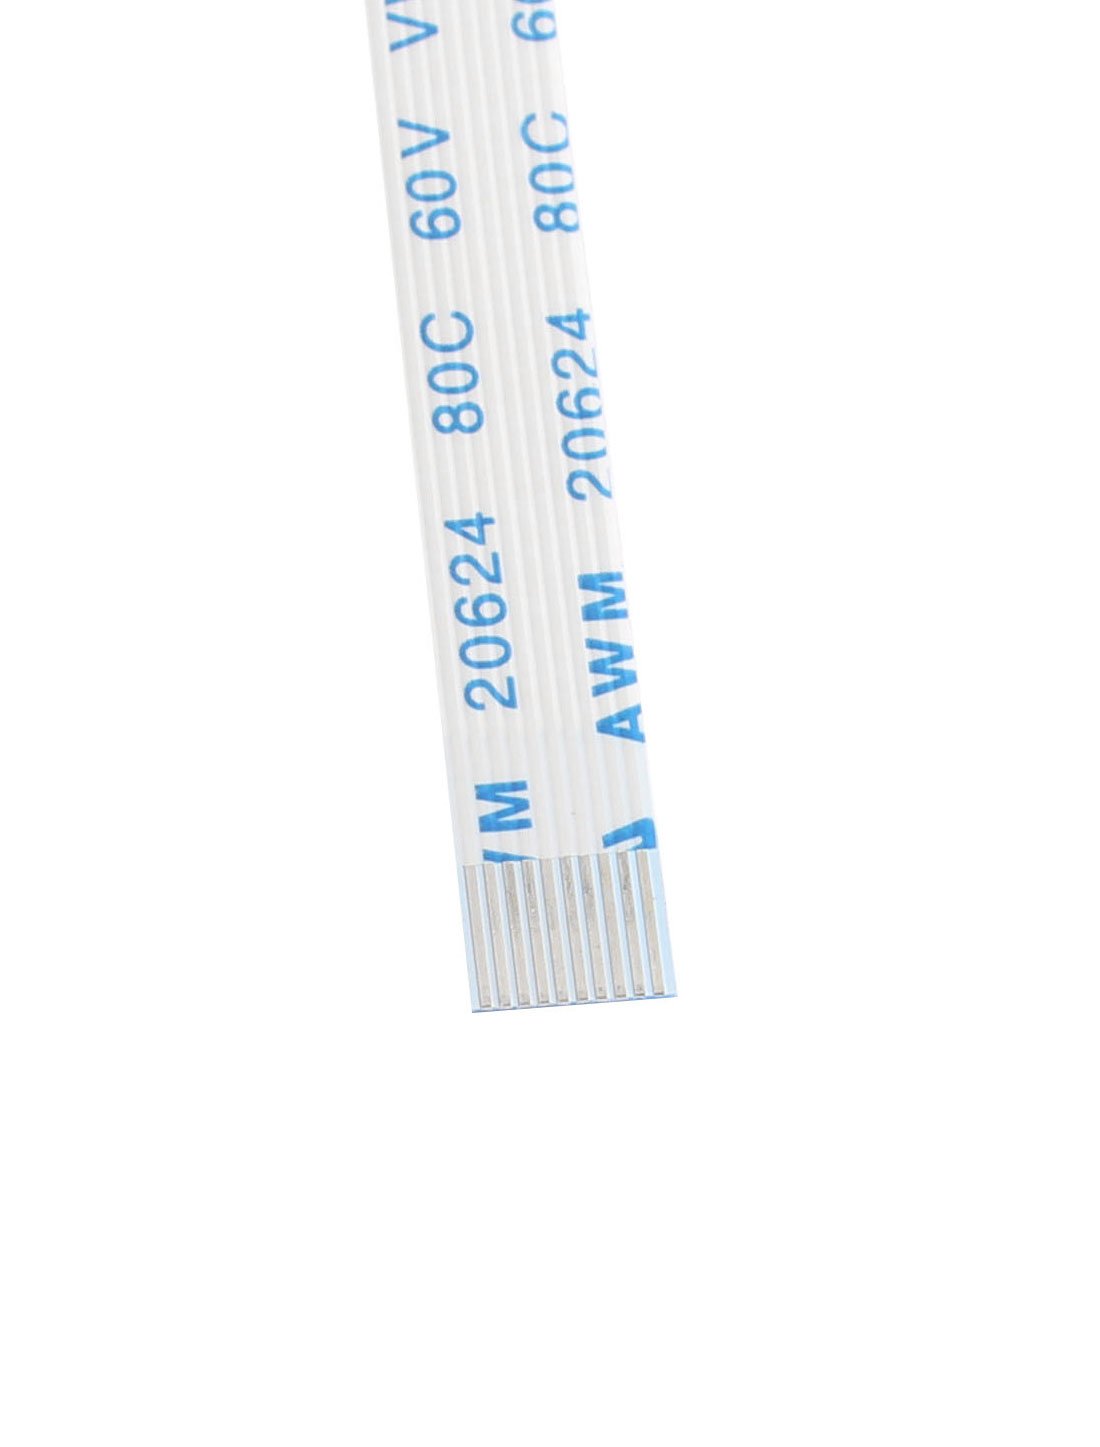 0.5mm-Pitch-10-pin-200mm-FPC-A-Type-Ribbon-Flexible-Flat-Cable-2.jpg